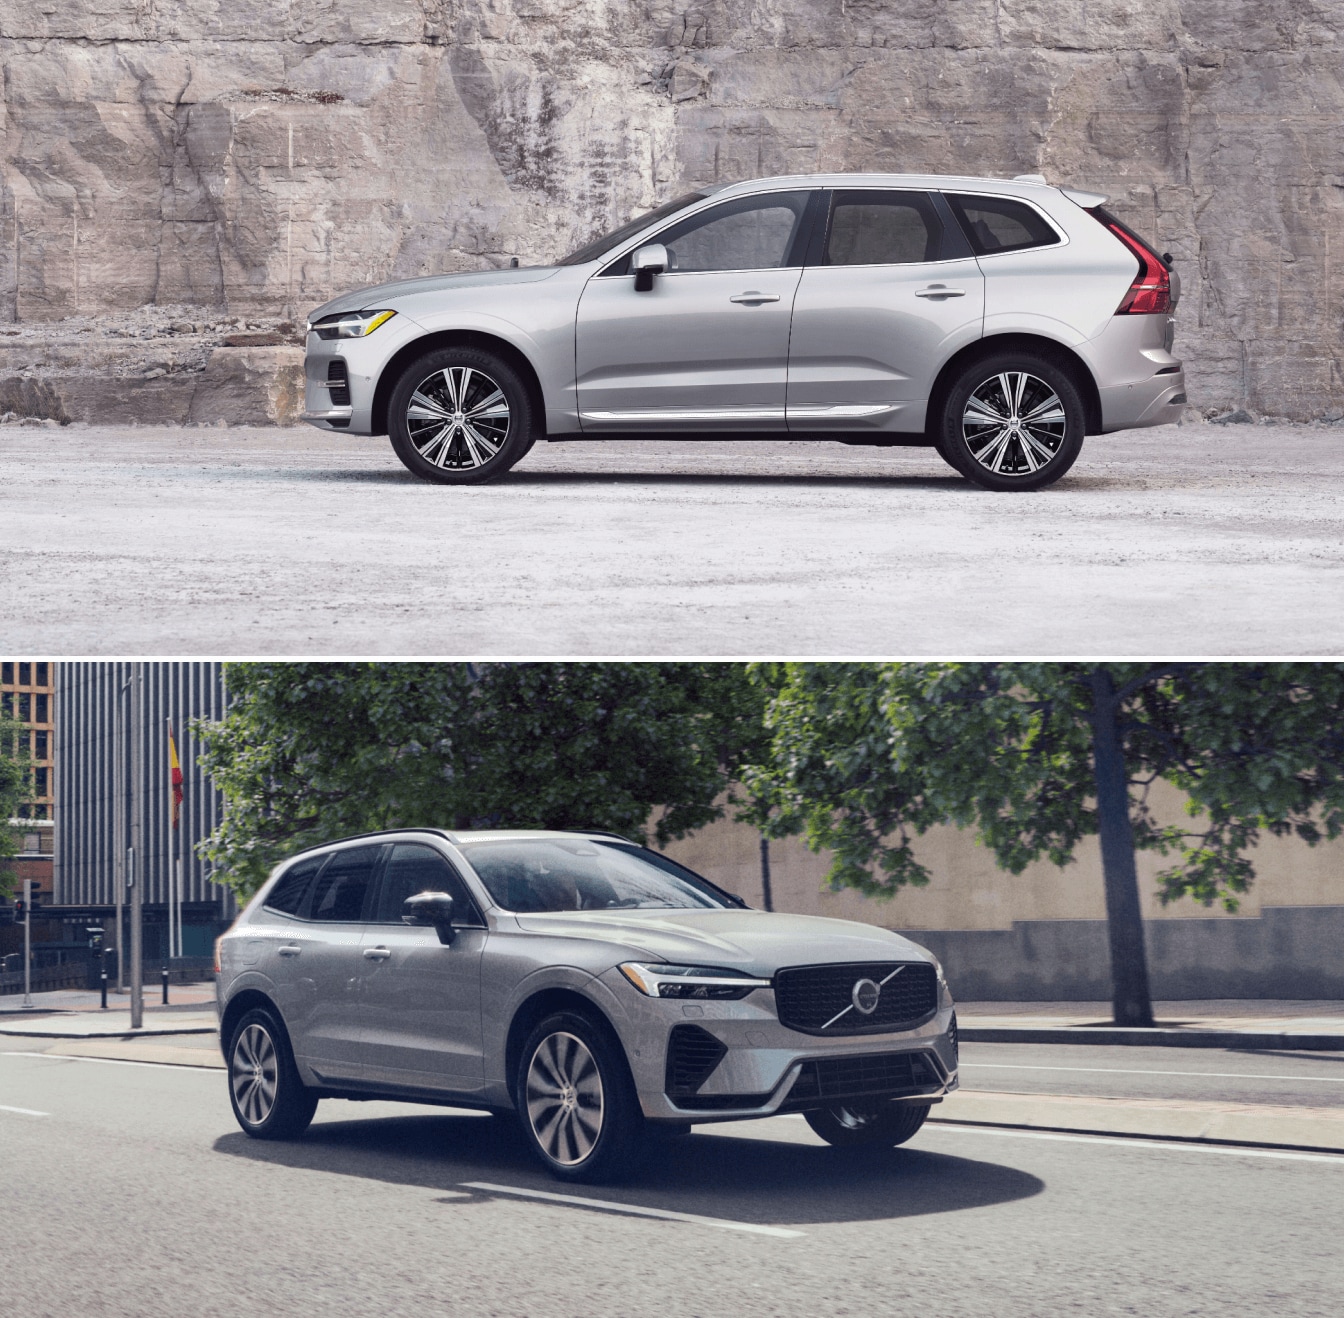 2024 Volvo SUV Lineup Hybrid And Electric Models And Specs